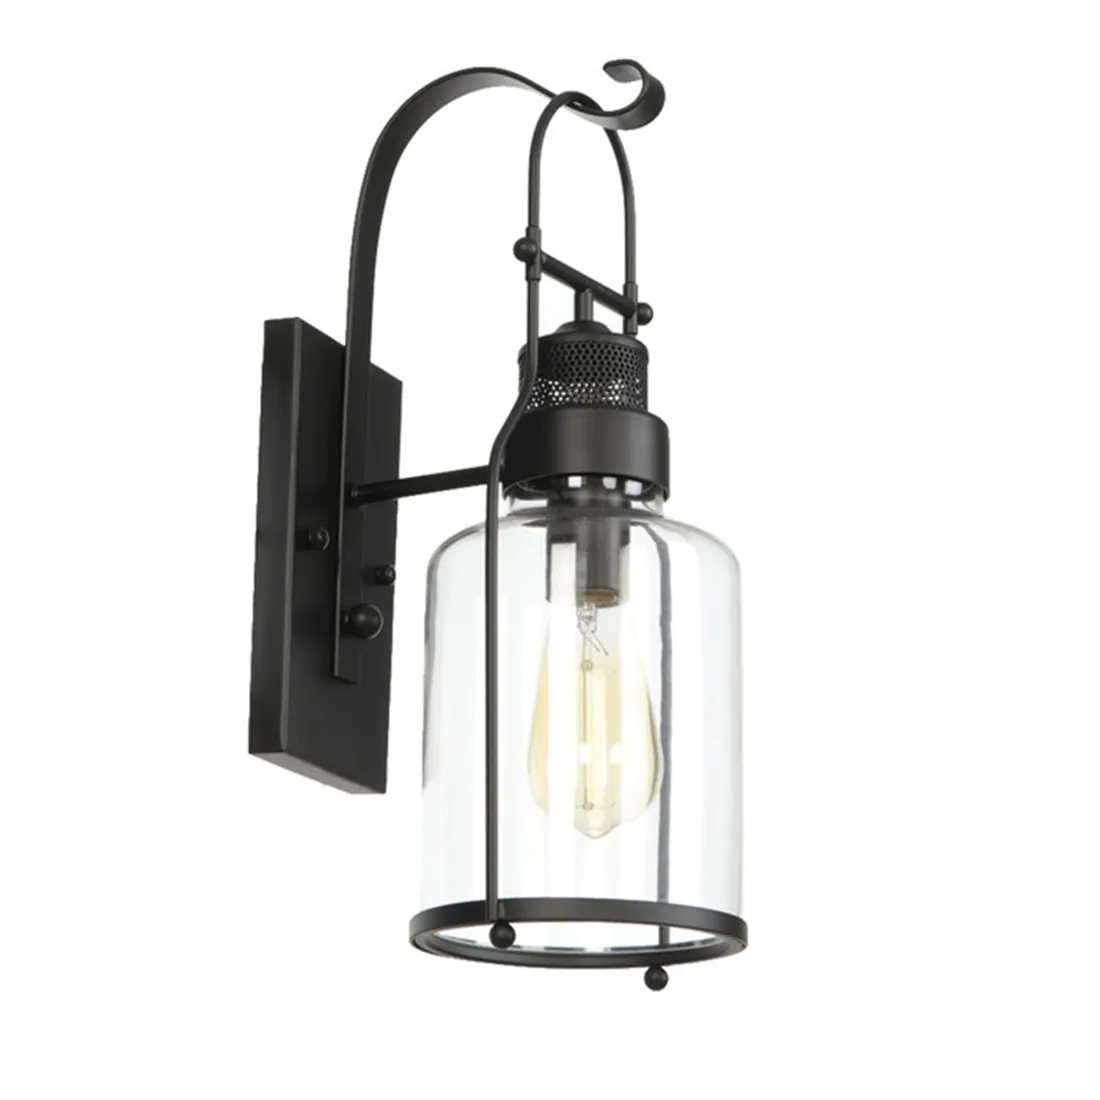 Outdoor Exterior Wall Lantern Wall Sconce Porch Lighting,Industrial Black Finish with Clear Glass for Exterior House